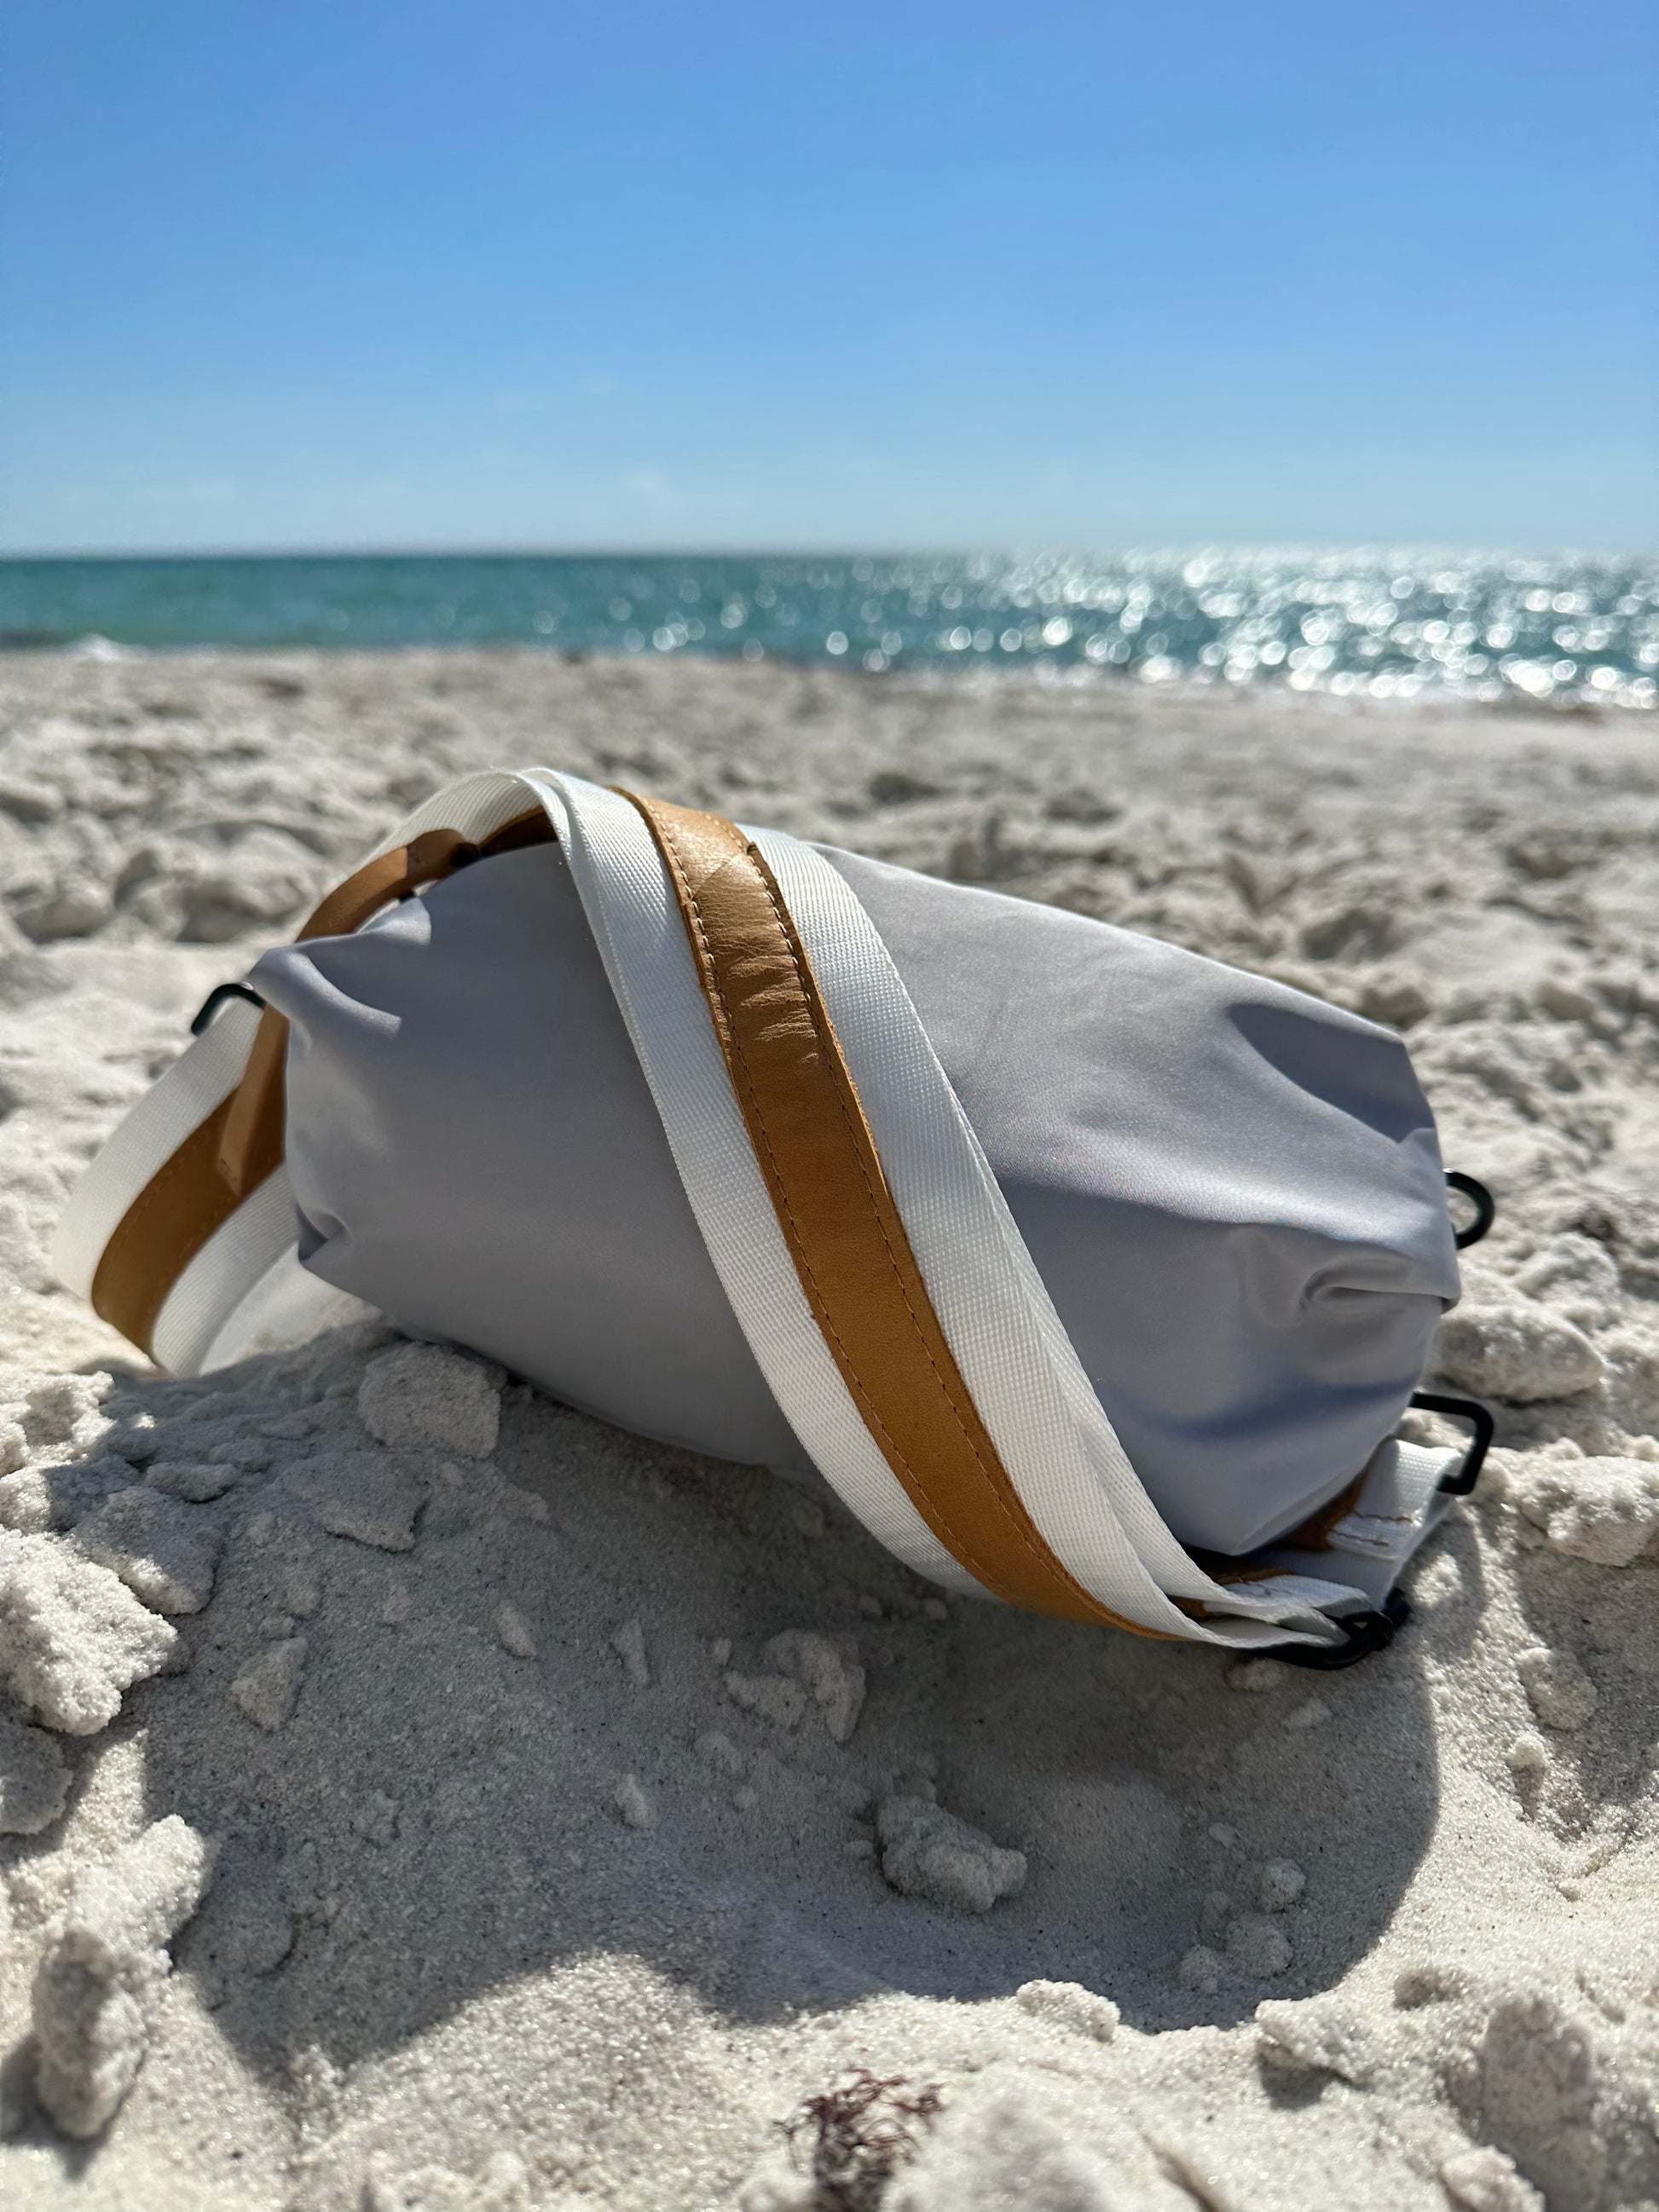 Gray nylon belt bag with white crossbody strap and tan leather detail on the beach